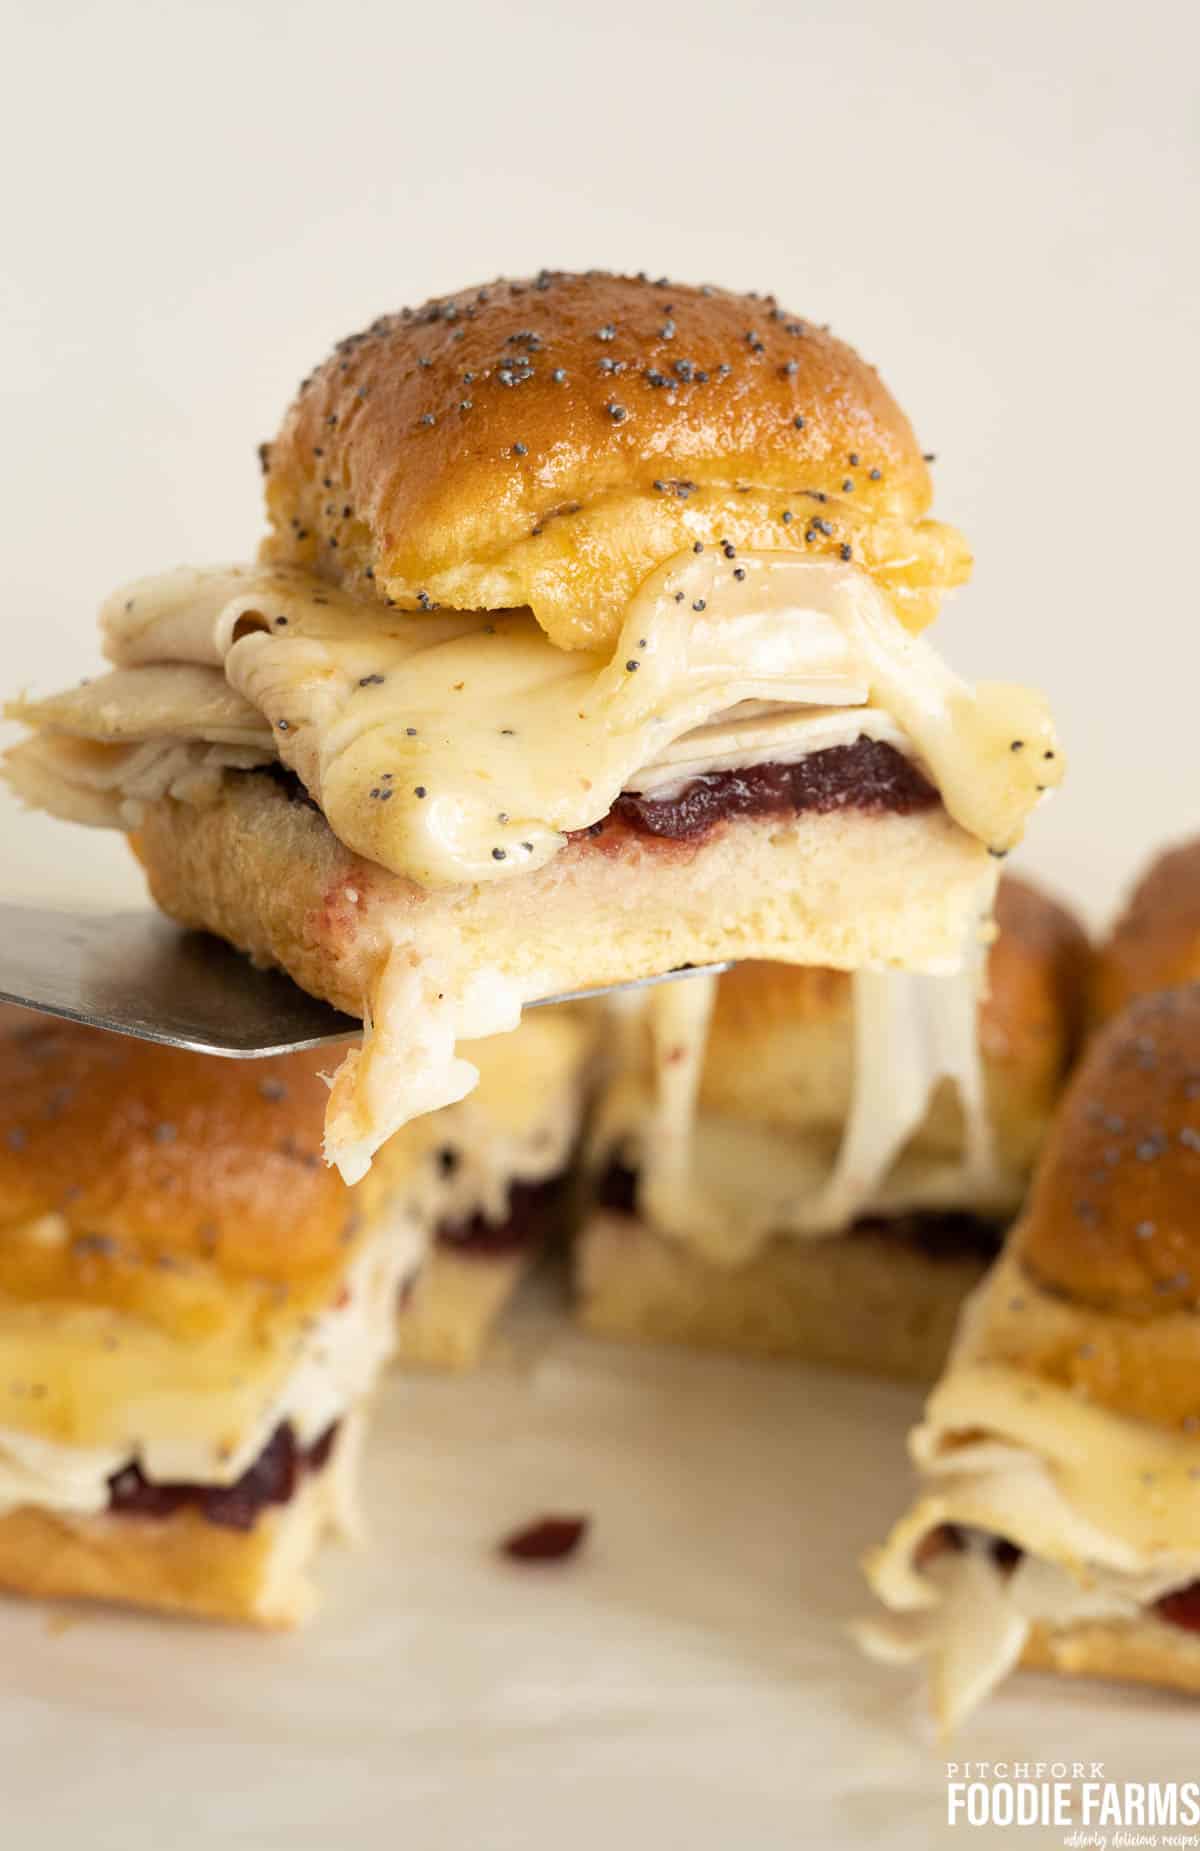 A baked slider with turkey and melted cheese and cranberries.